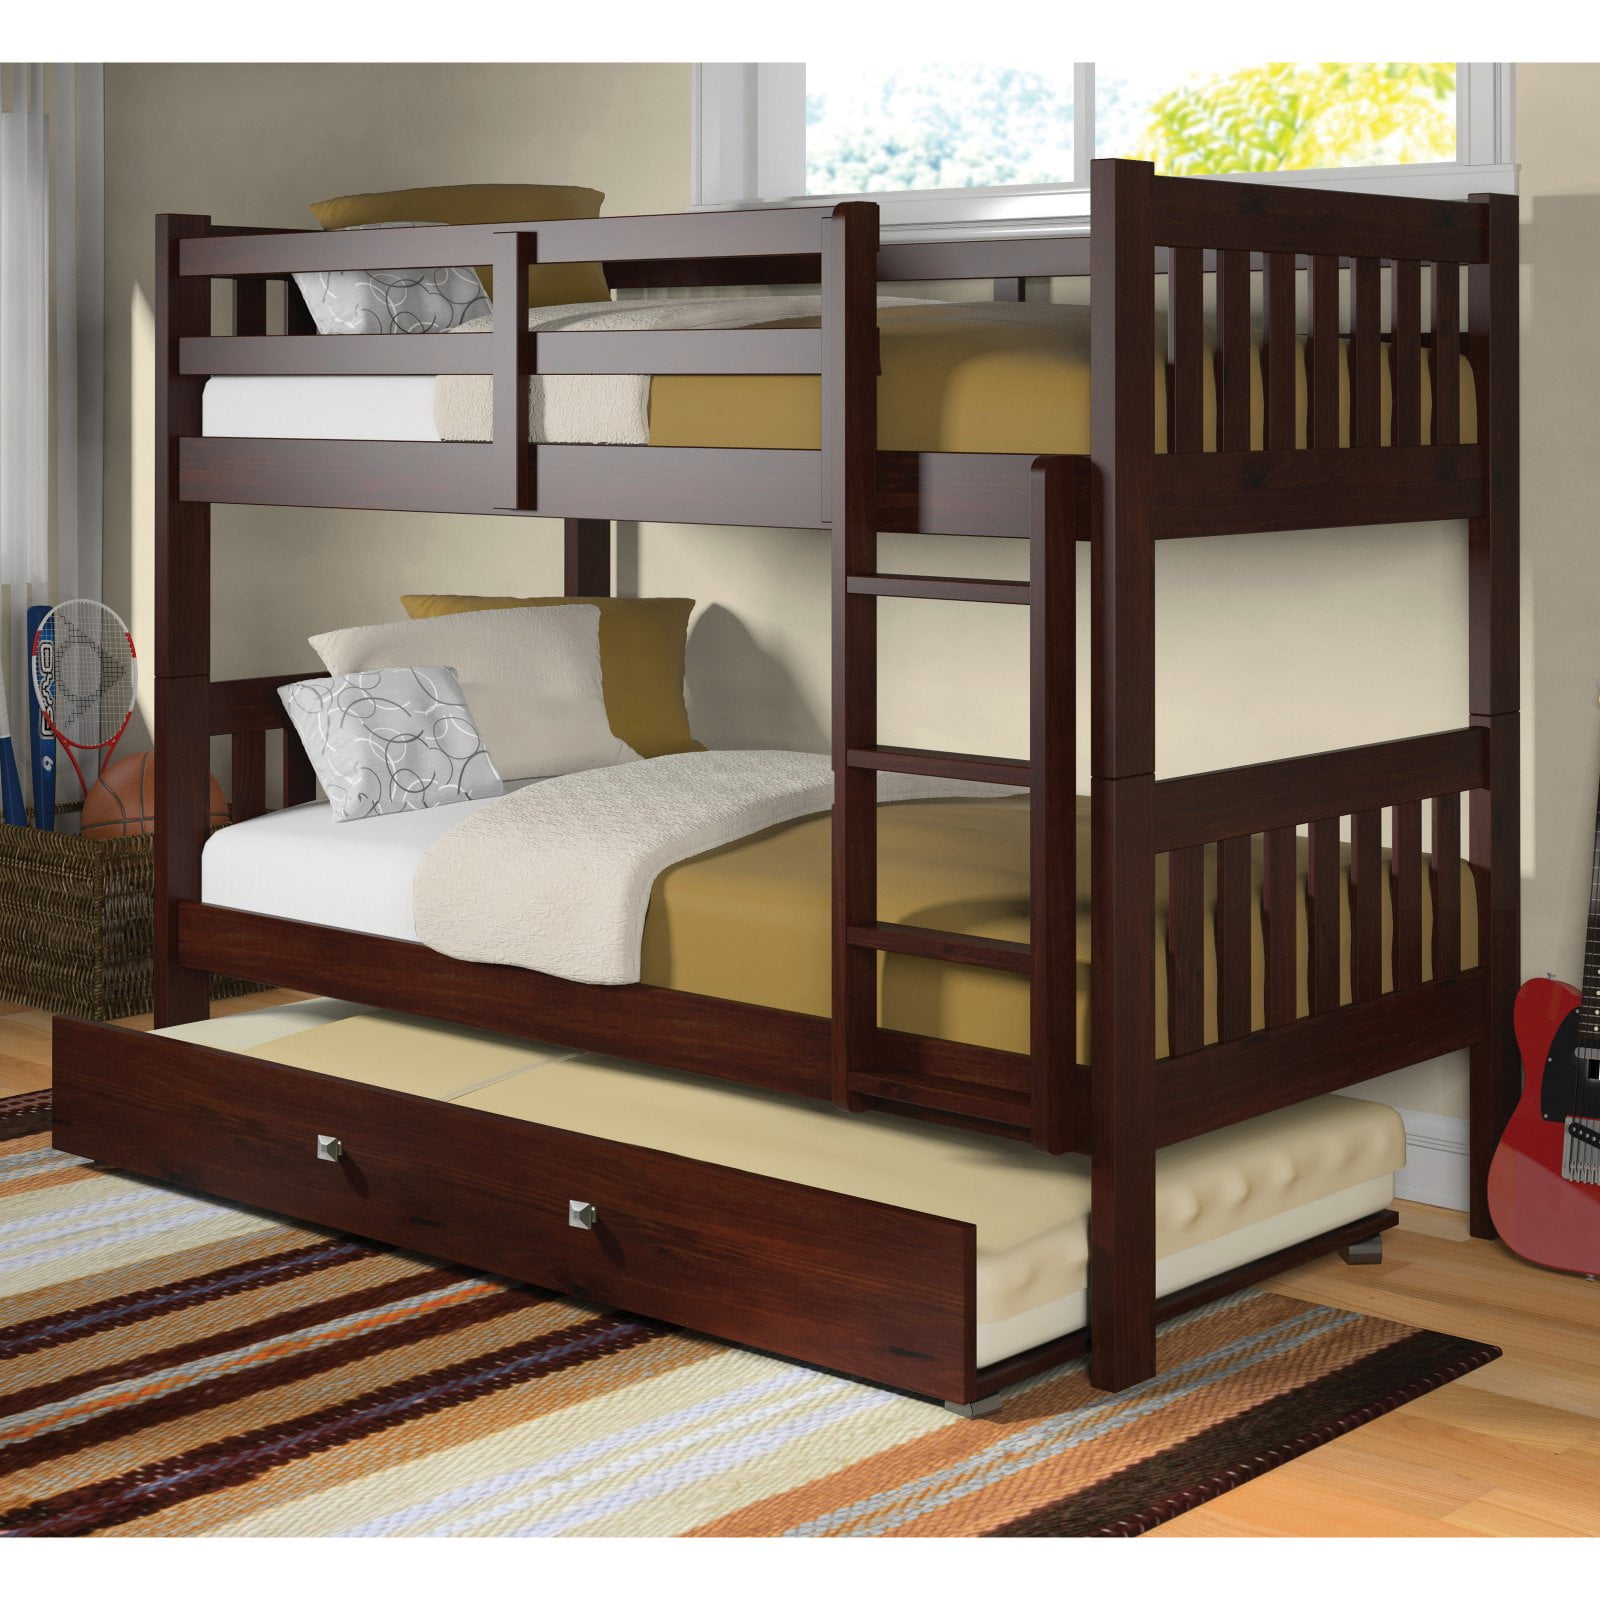 Acme Furniture Allentown Twin Over, Allentown Bunk Bed Reviews